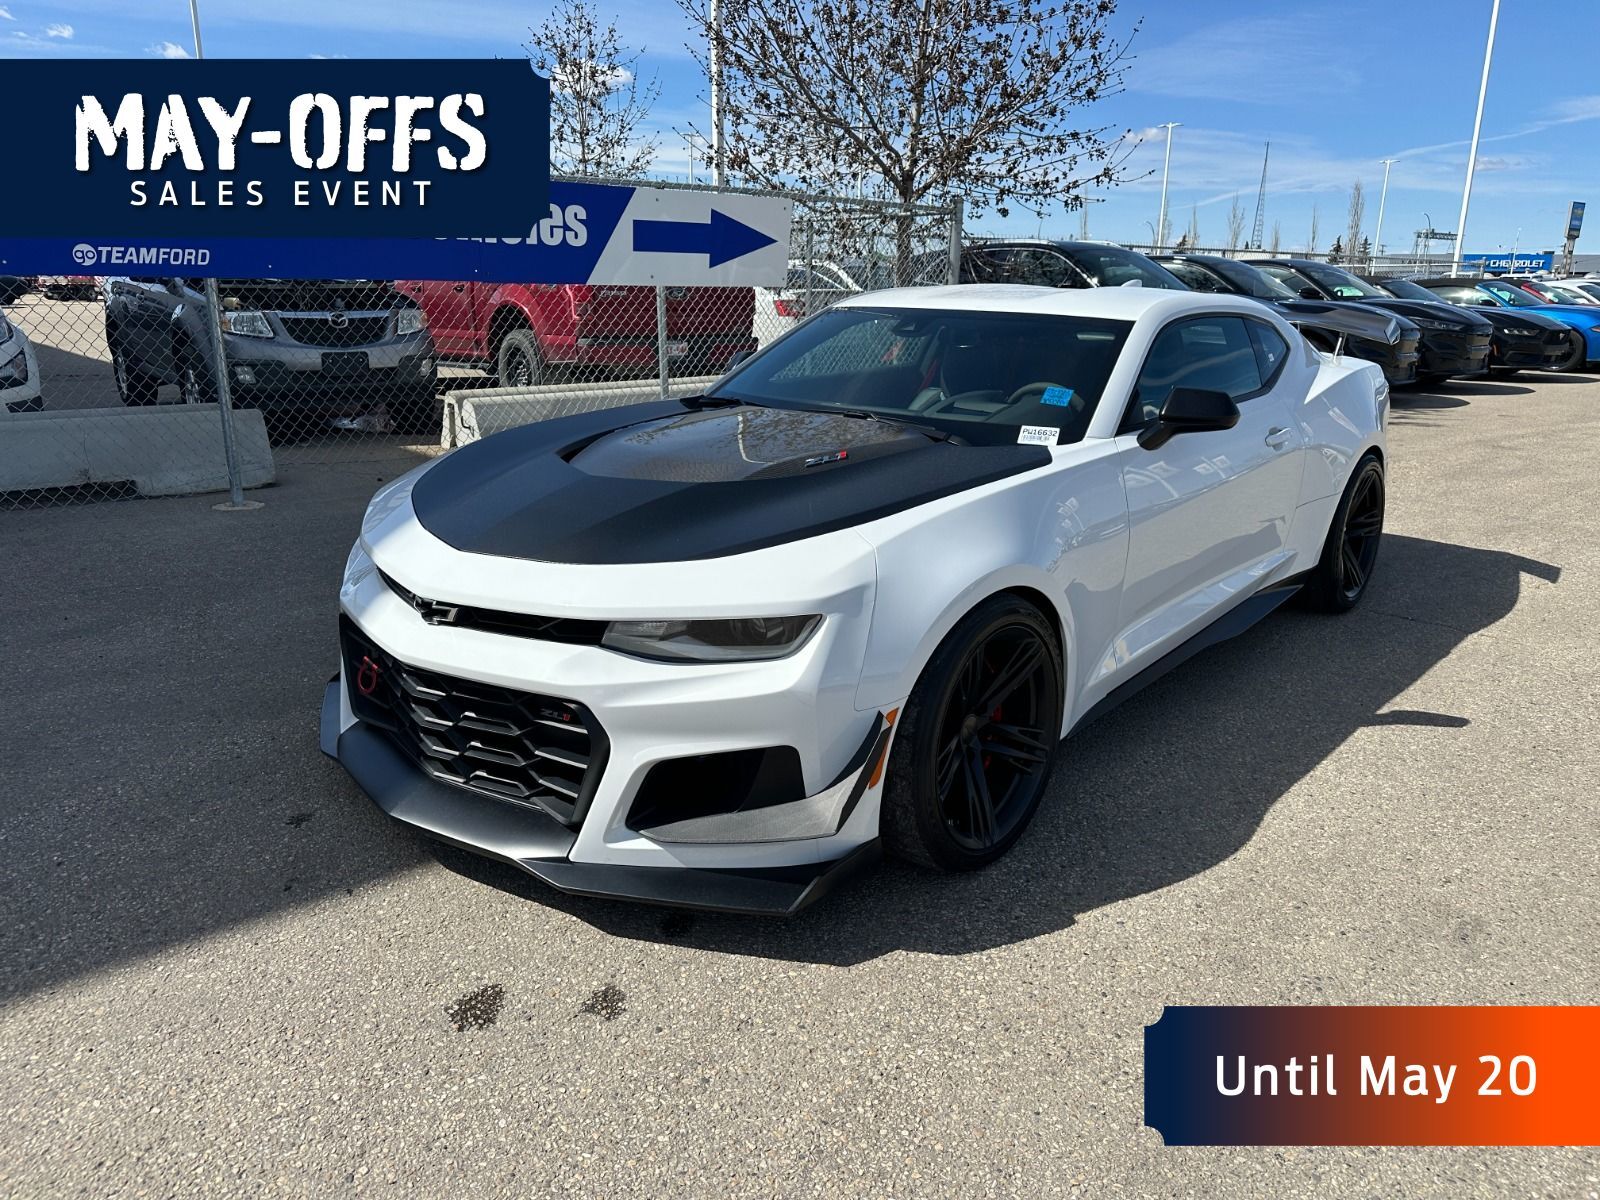 2020 Chevrolet Camaro ZL1 1LE - RED CALIPERS, FRONT SPLITTER, PERFORMANC